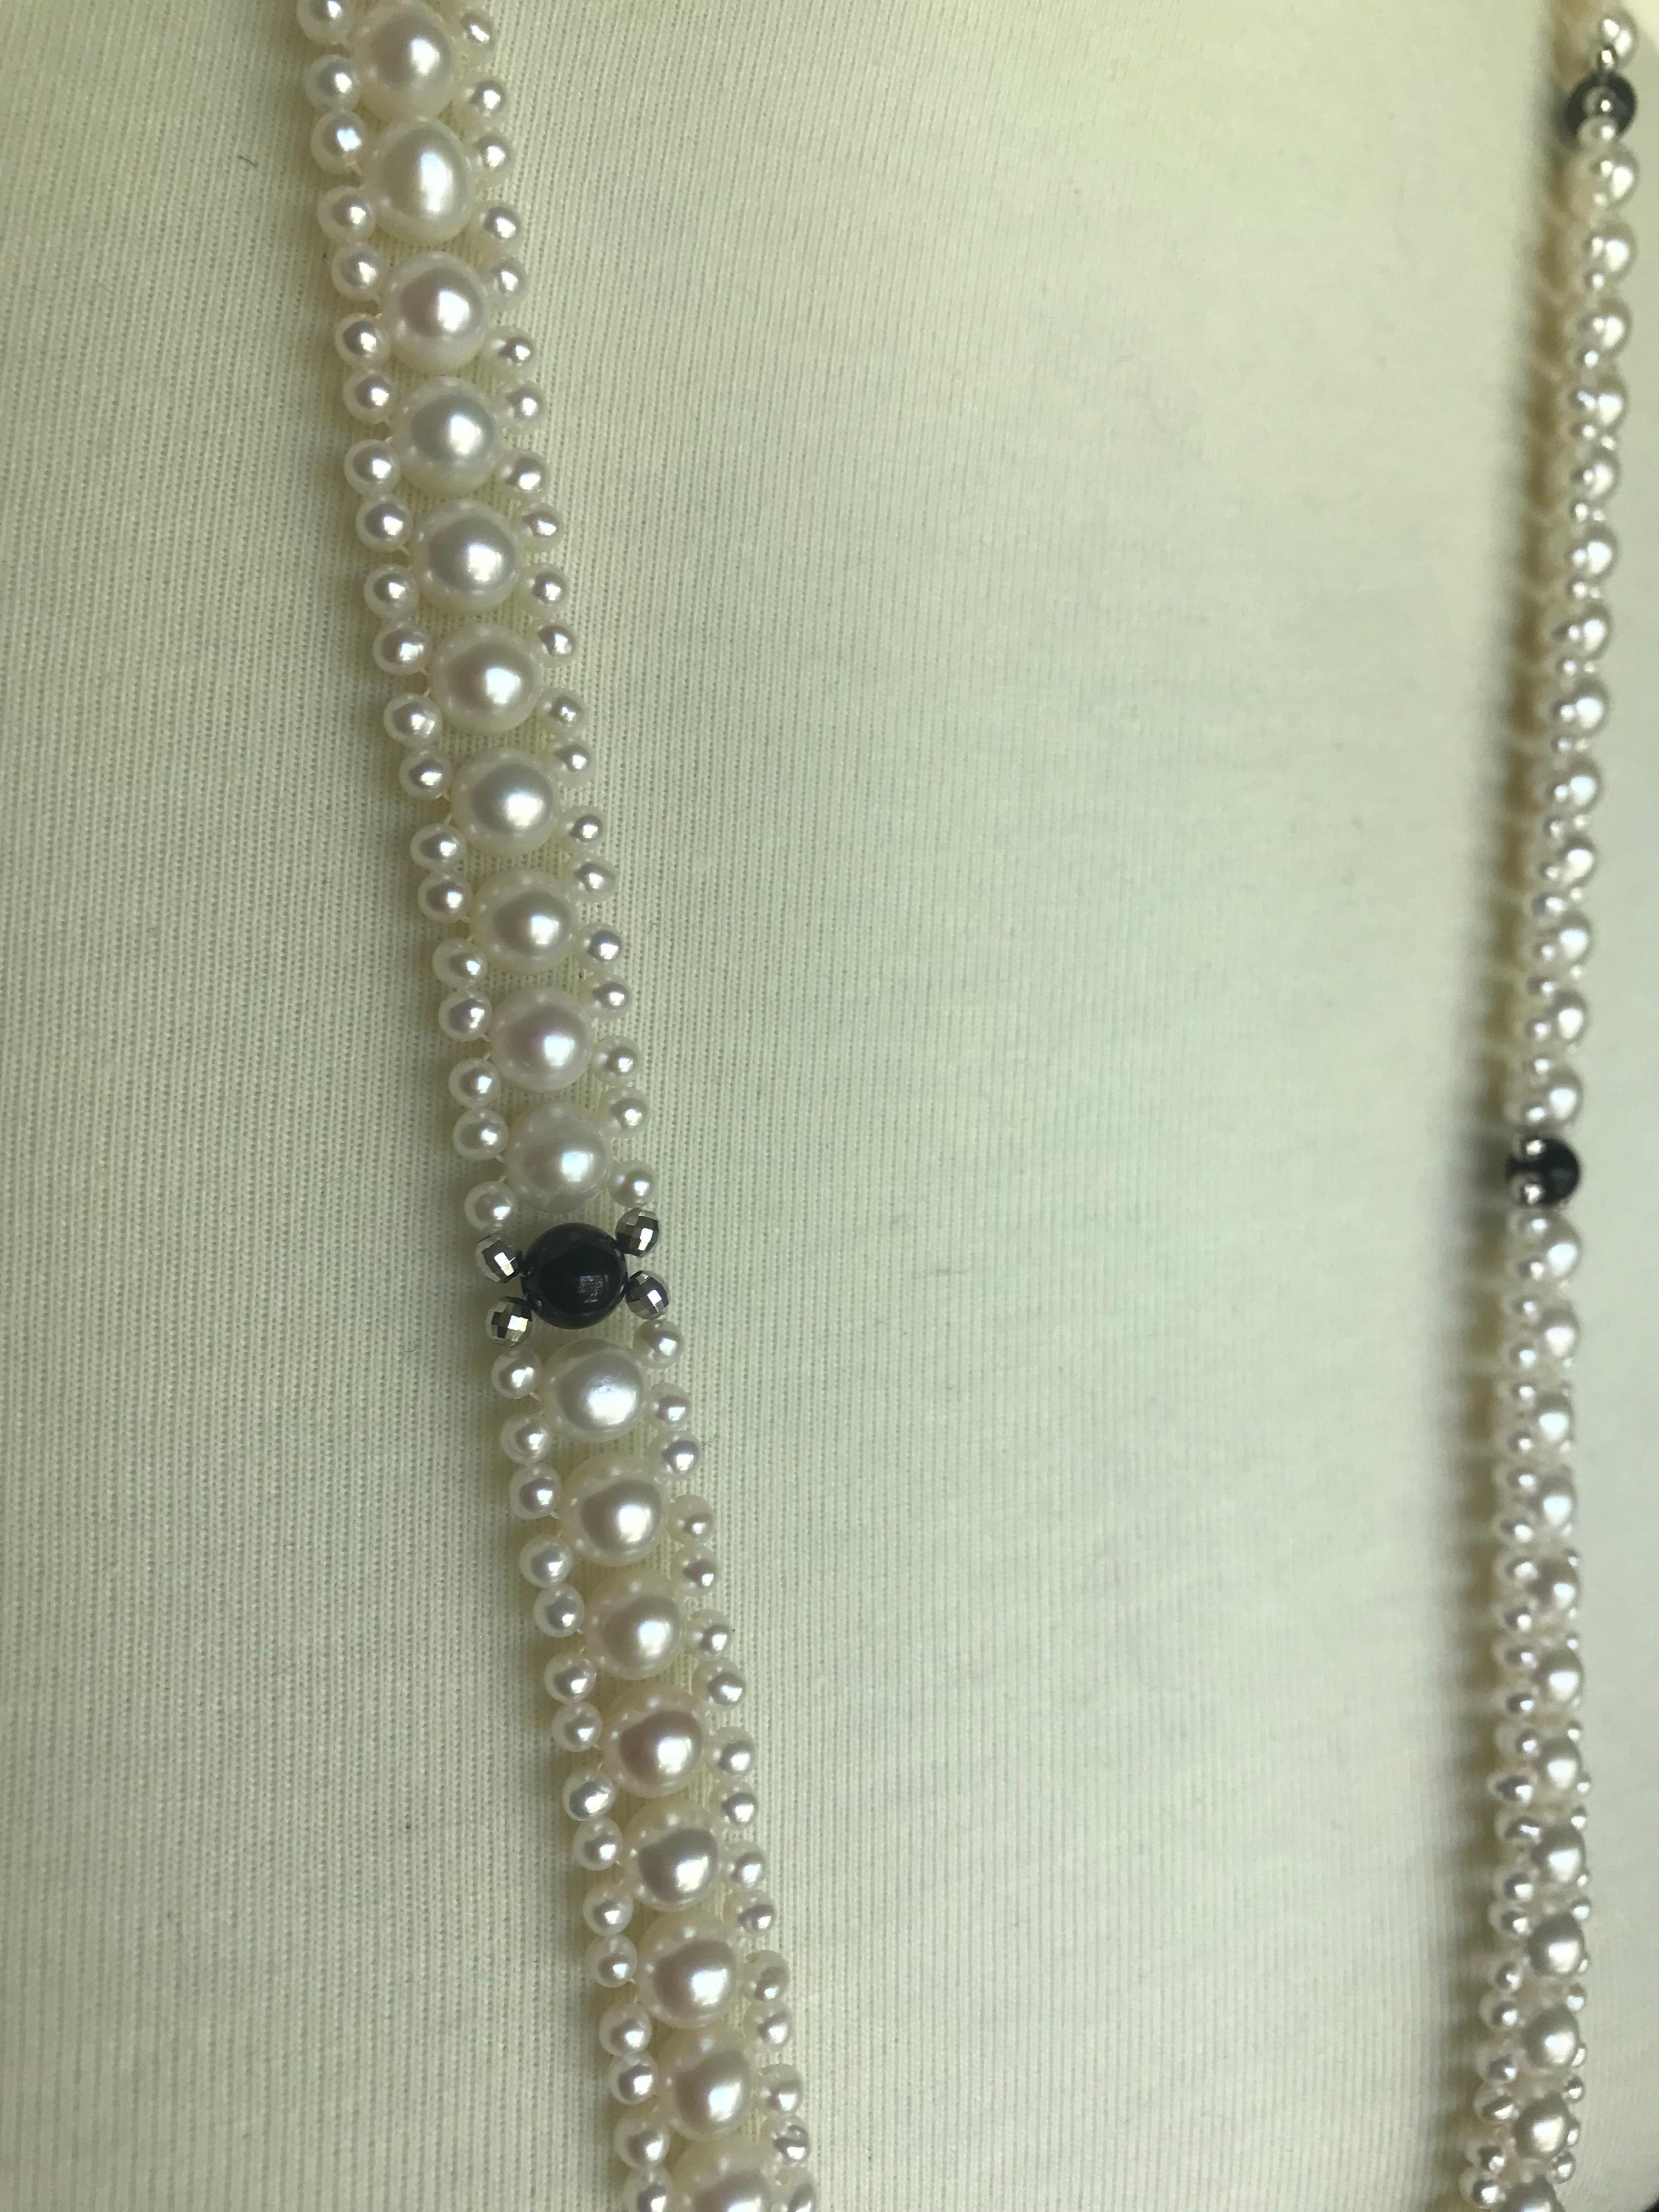 Marina J Woven Pearl Sautoir with Tassels and 14 K White Gold and Onyx beads 9